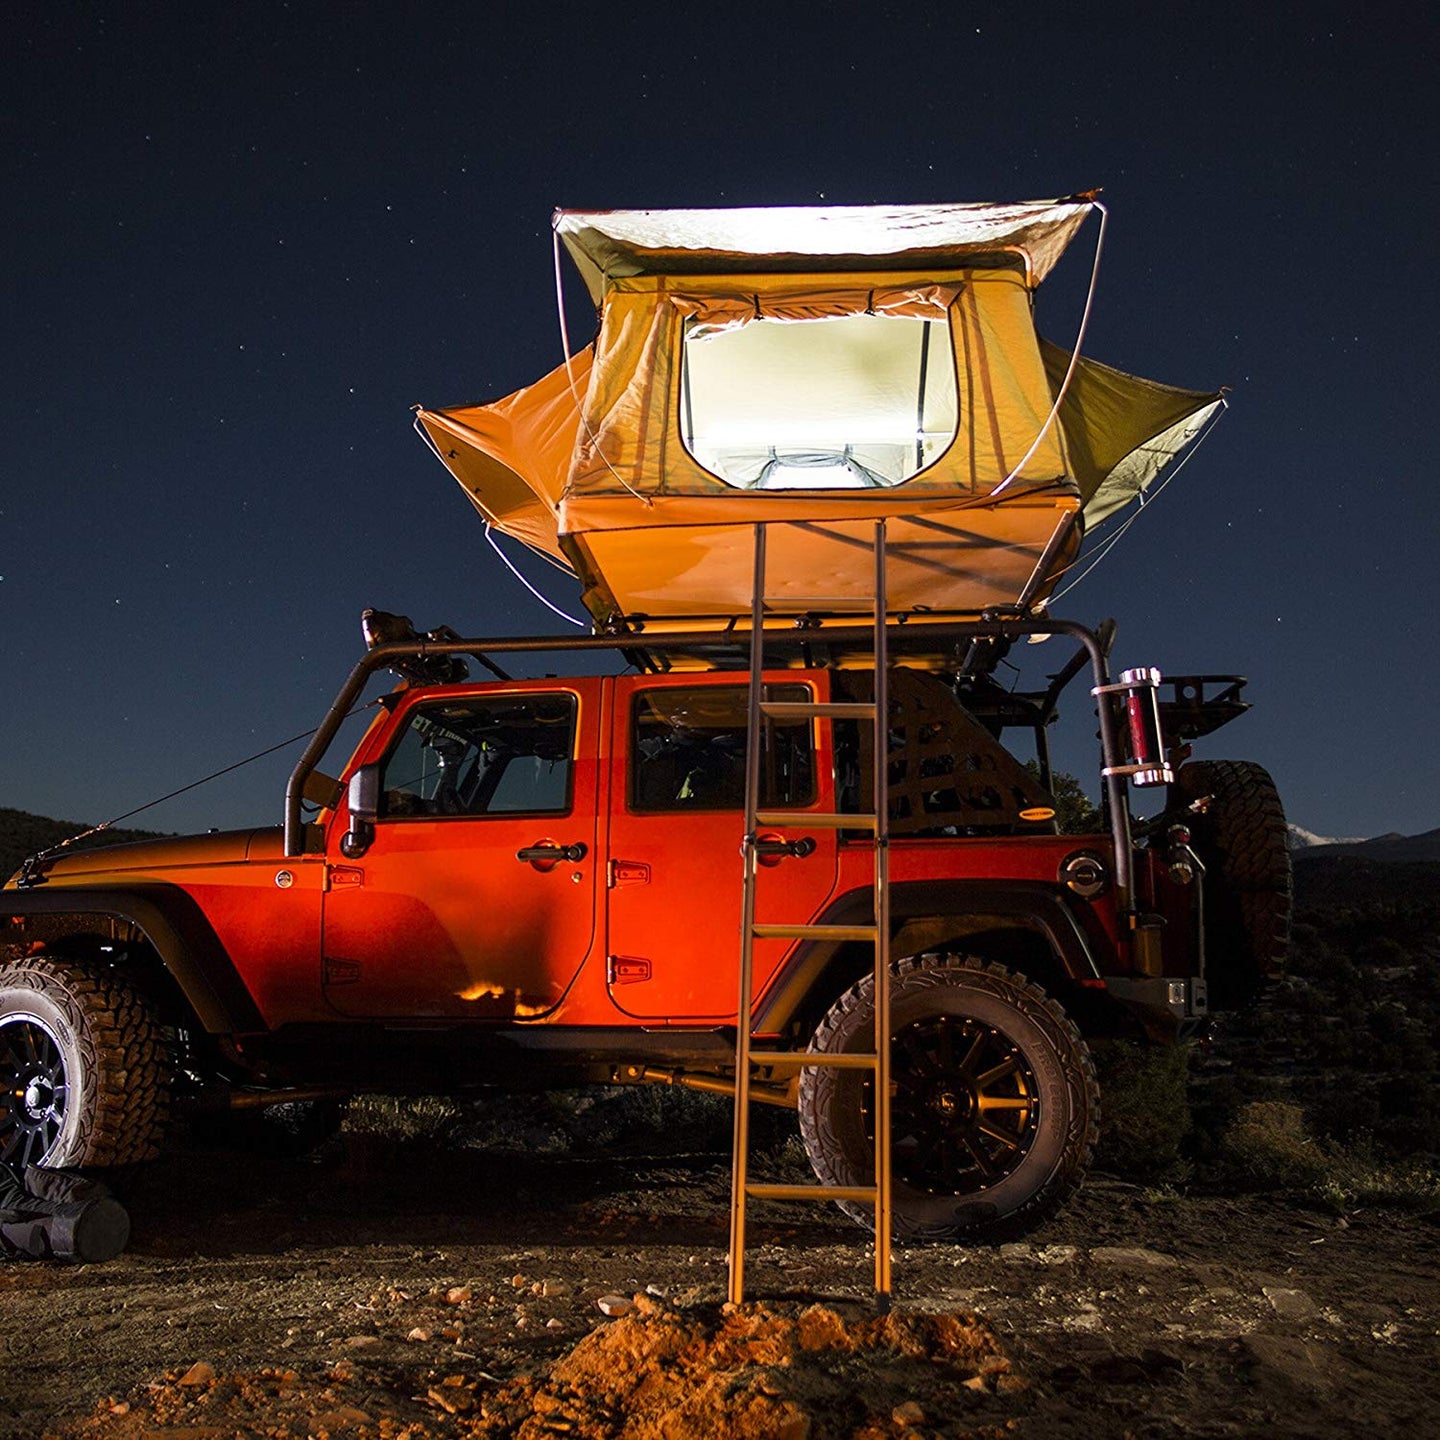 A jeep with a camping tent.